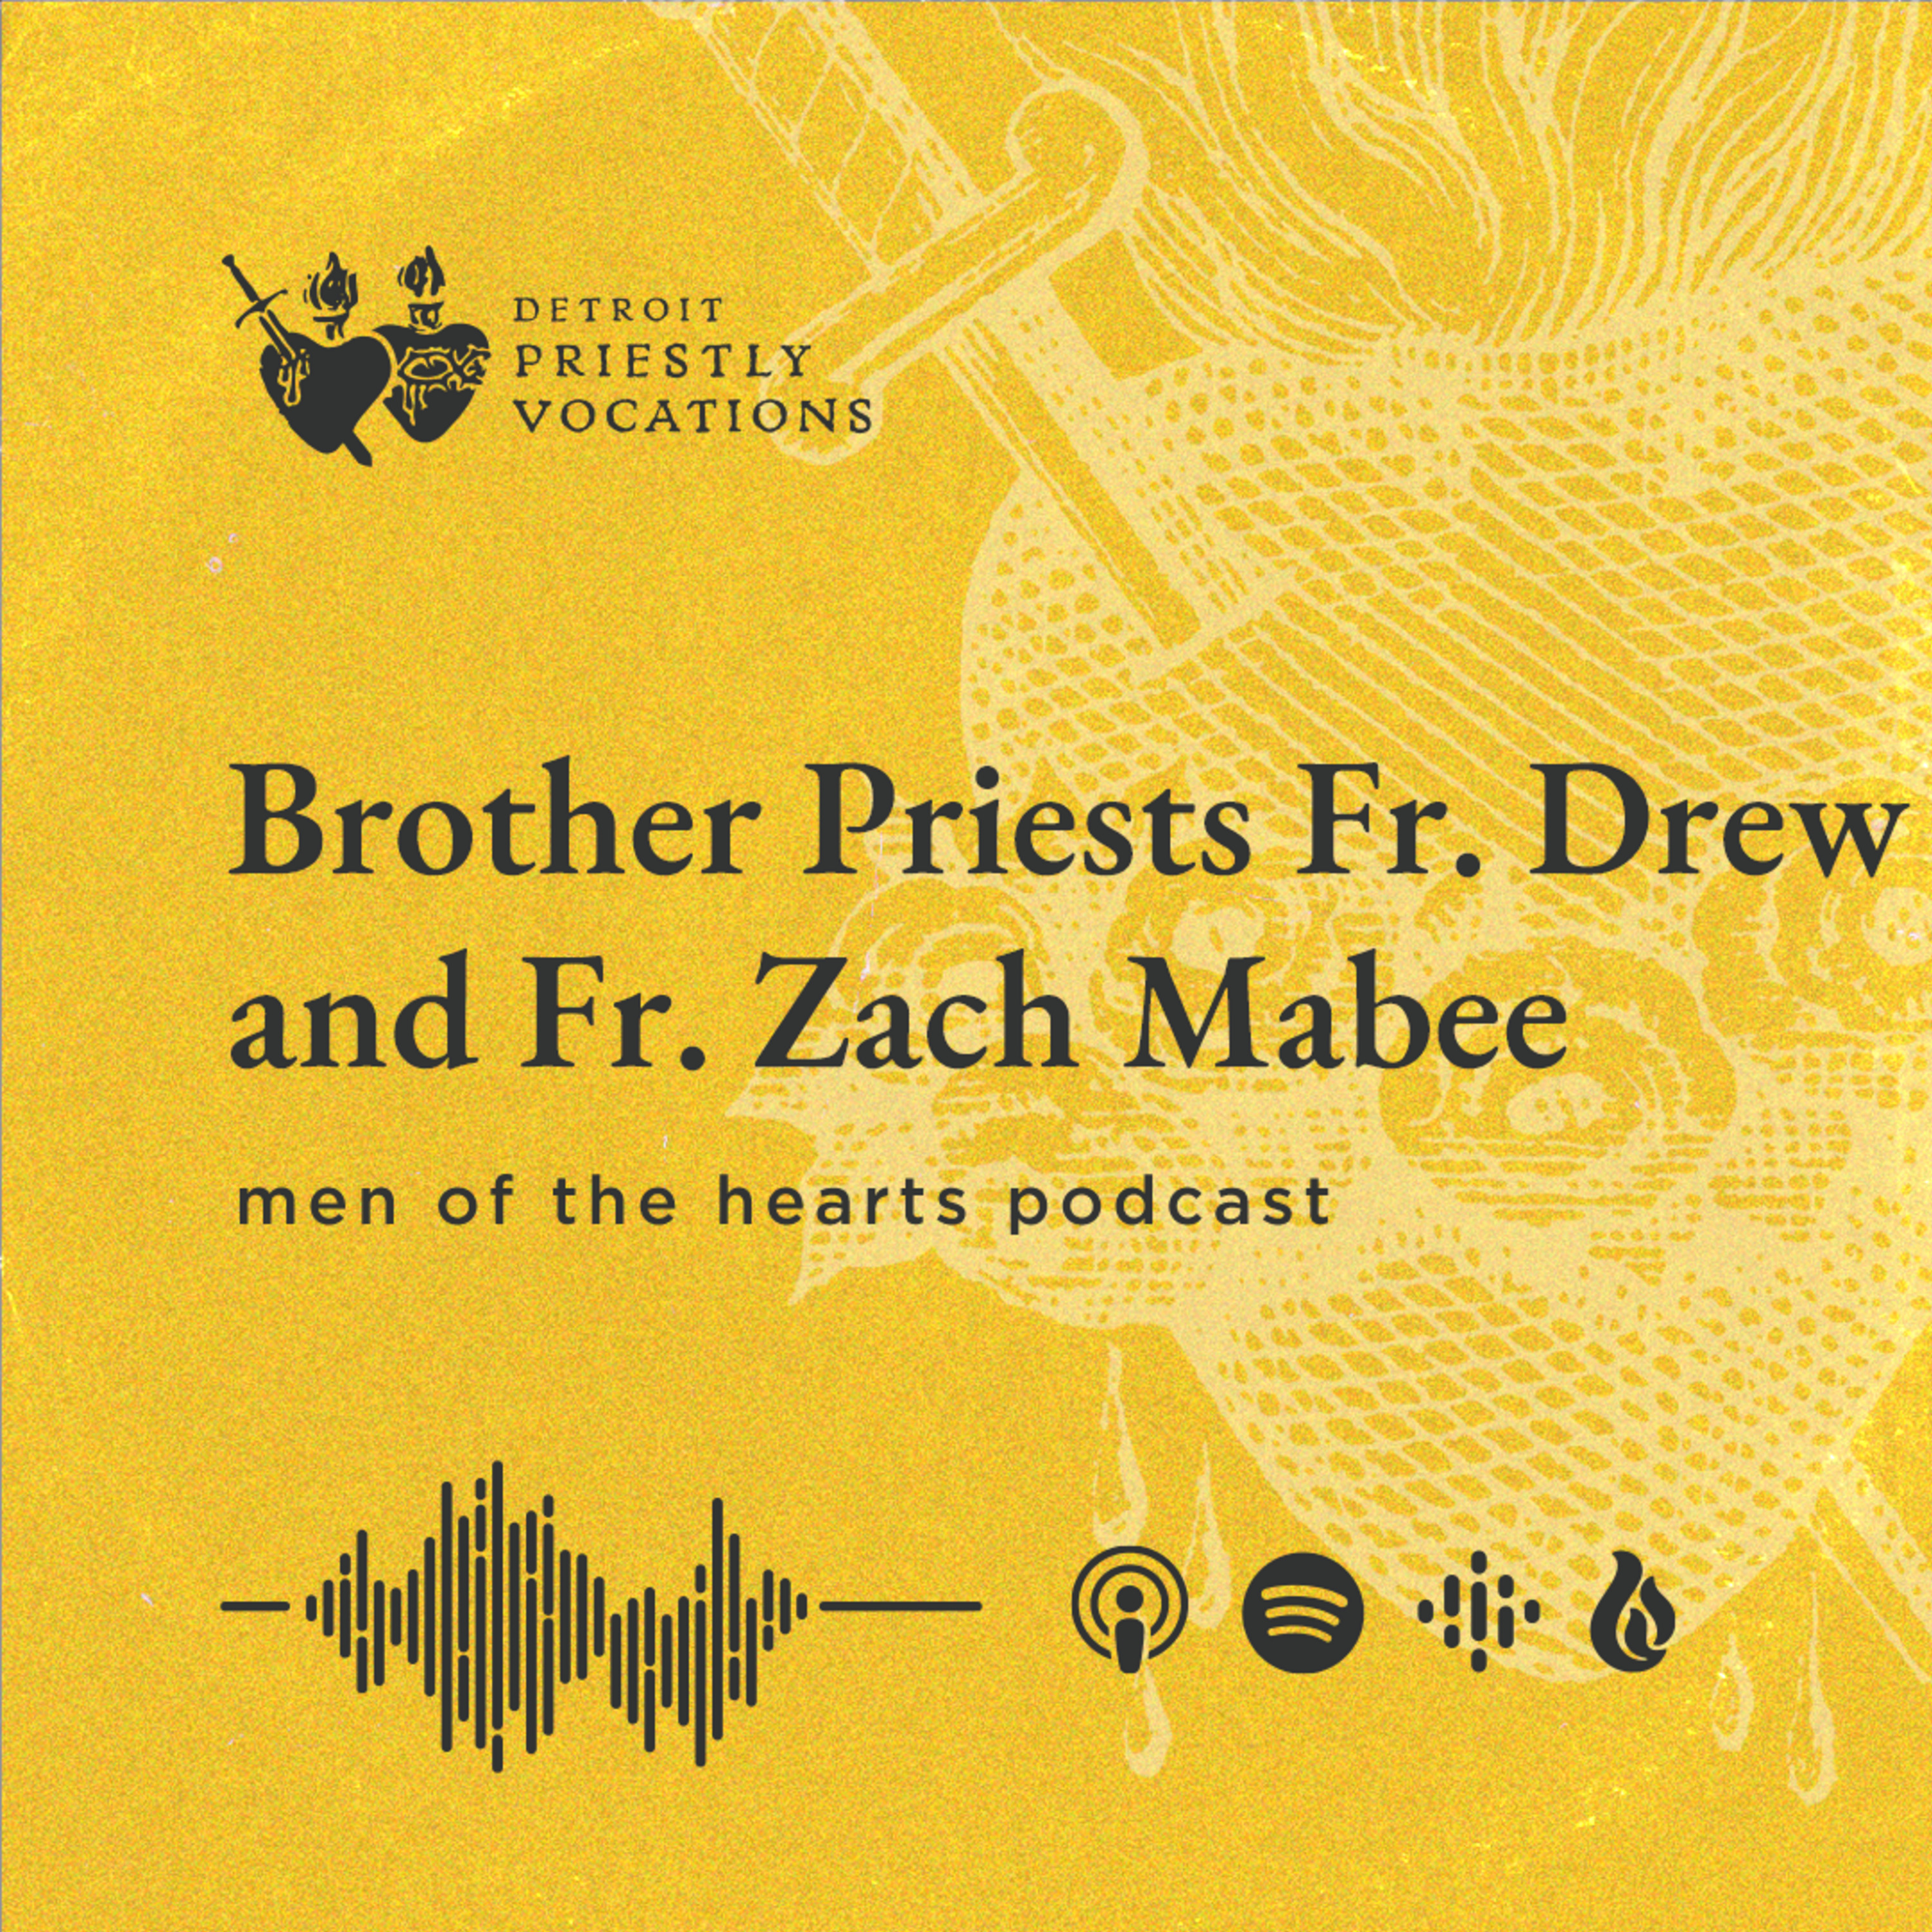 Brother Priests Fr. Drew and Fr. Zach Mabee